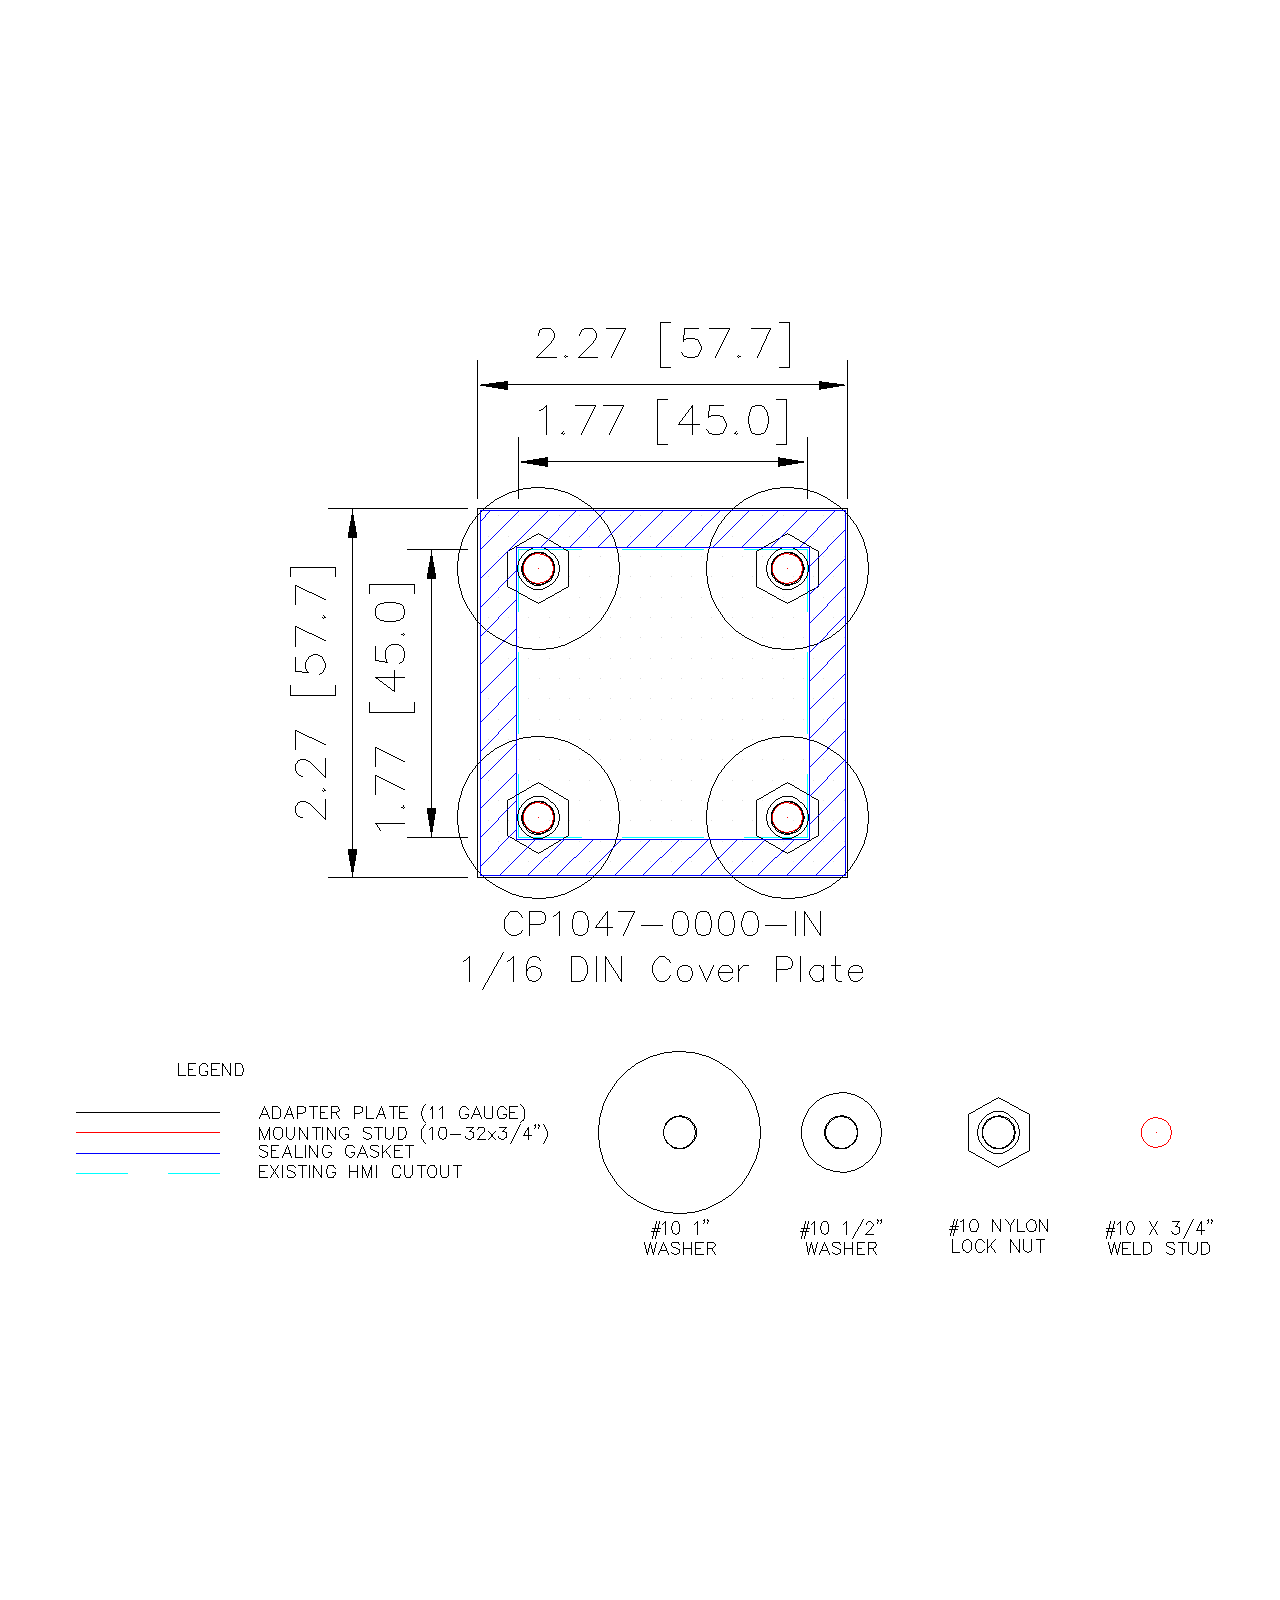 Cover Plate - 1/16 DIN